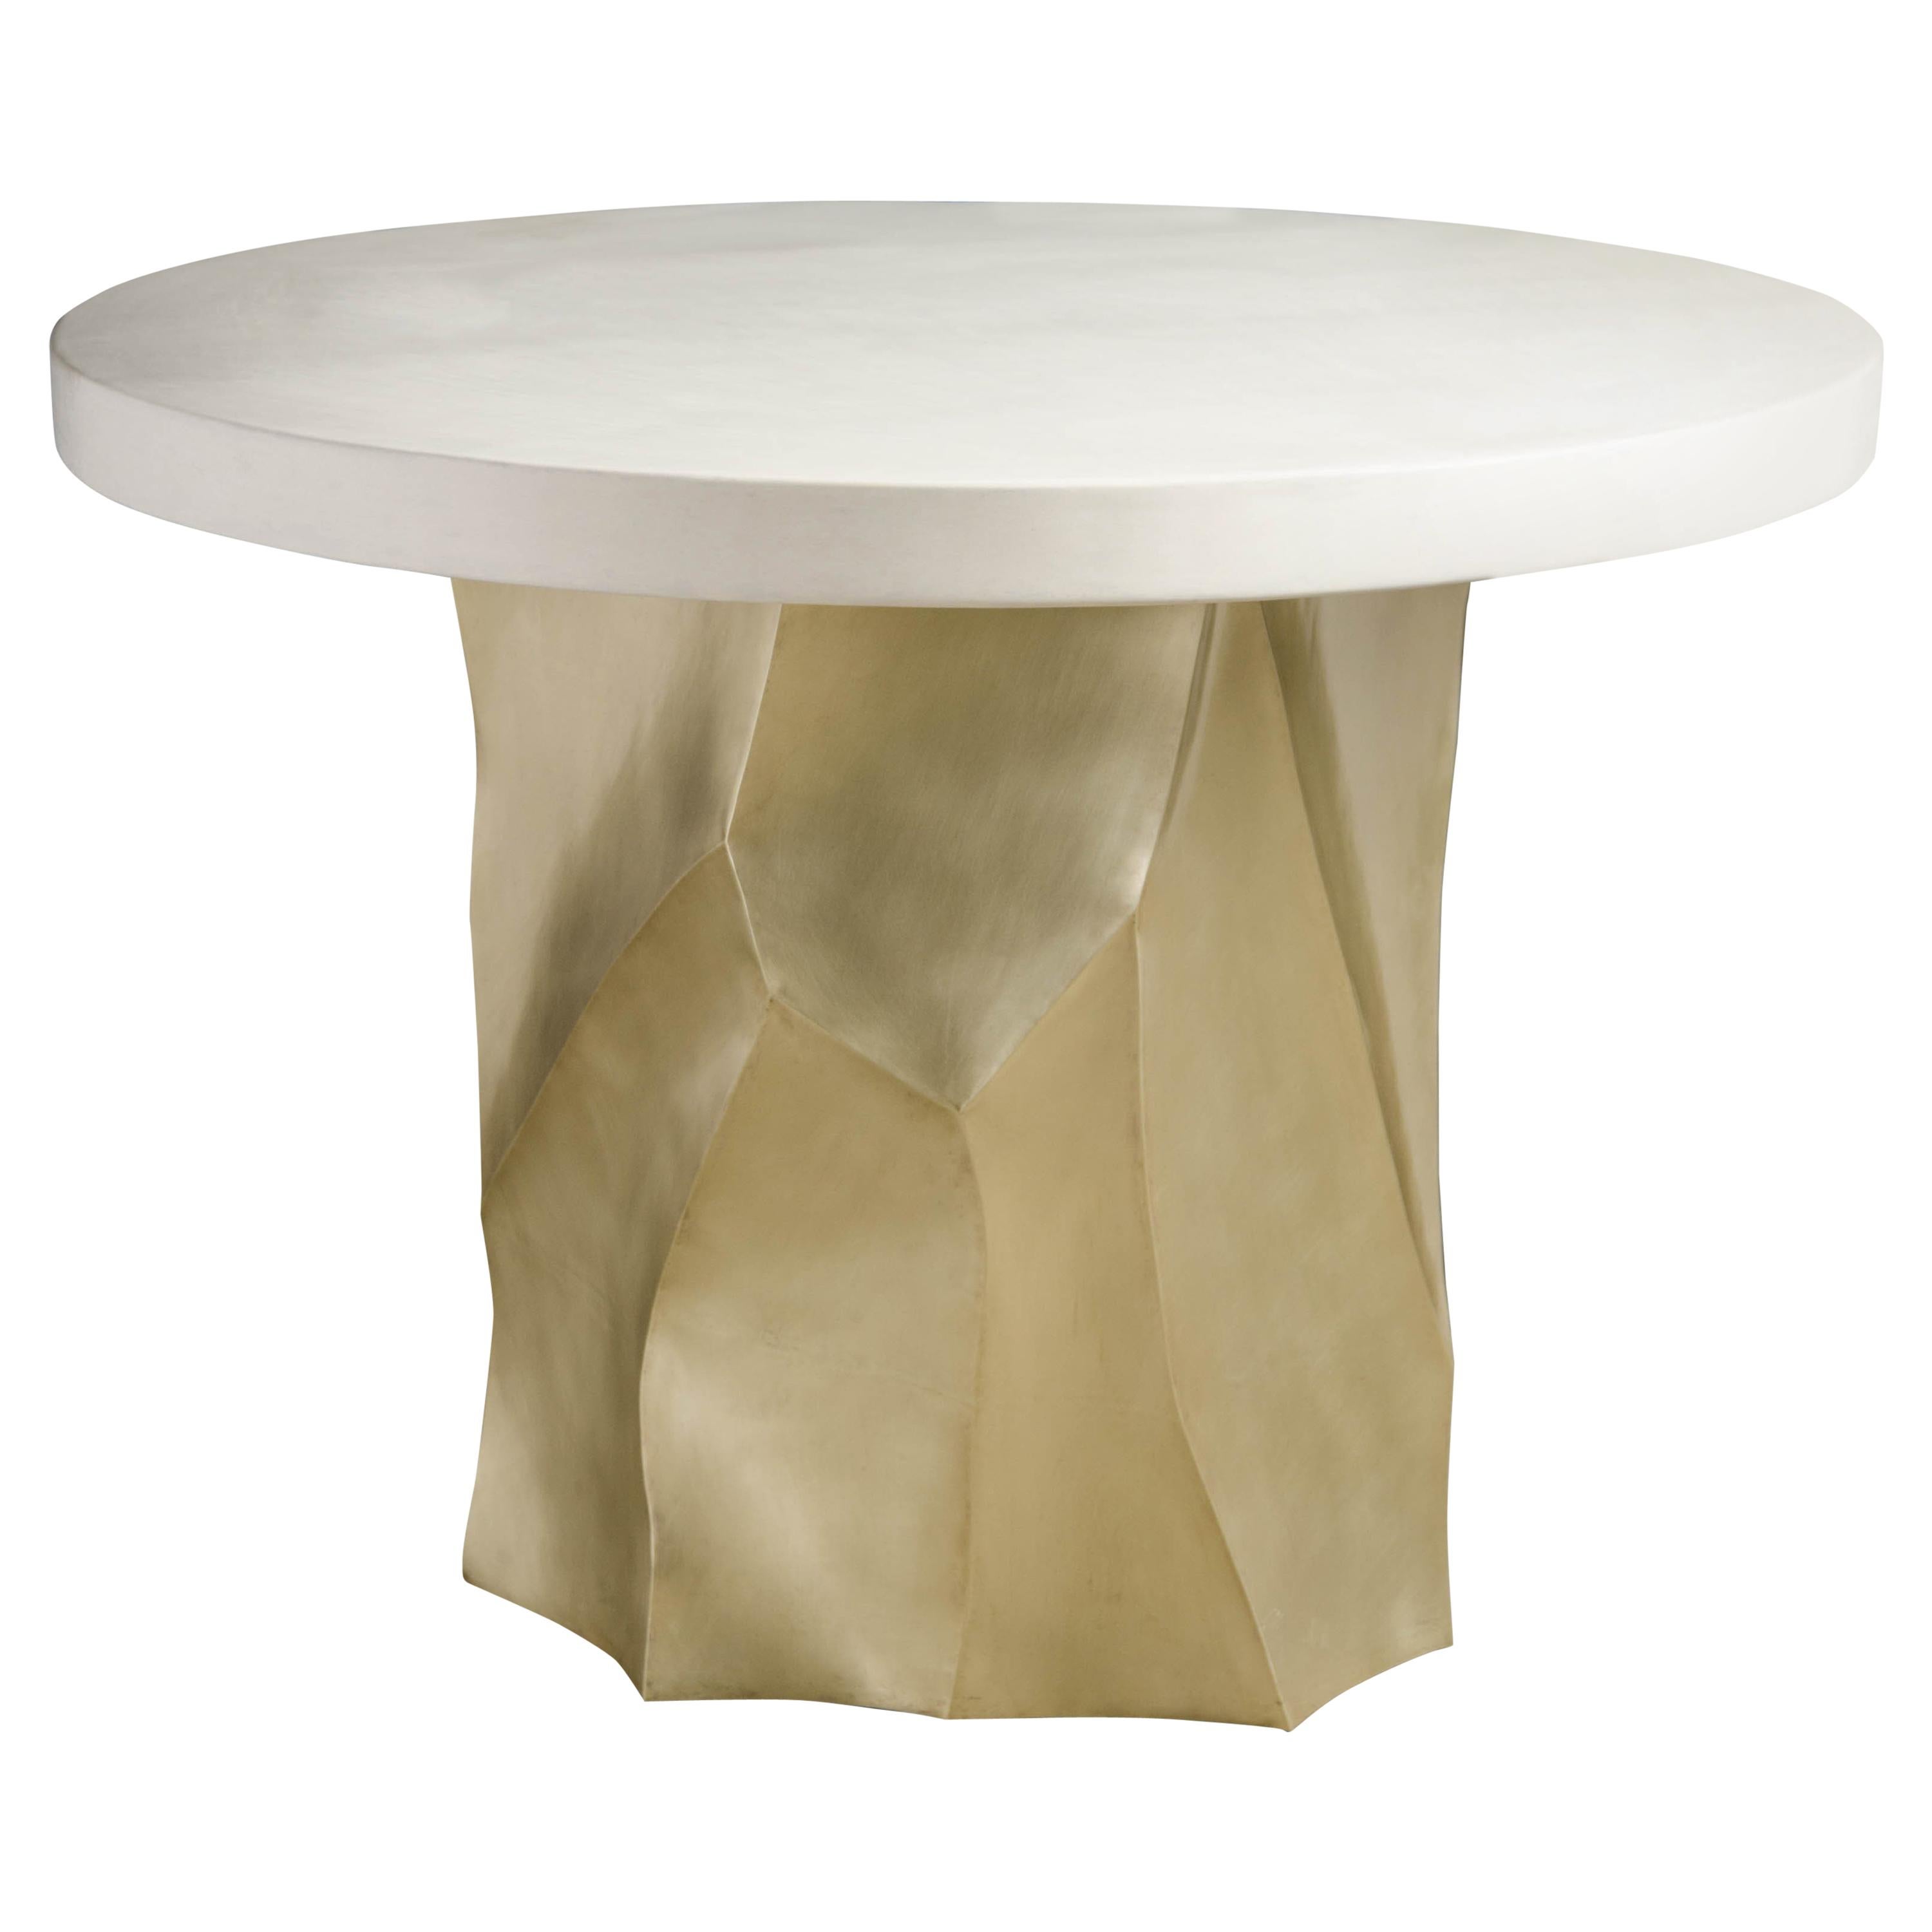 Cream Lacquer Entry Table Top by Robert Kuo, Limited Edition For Sale